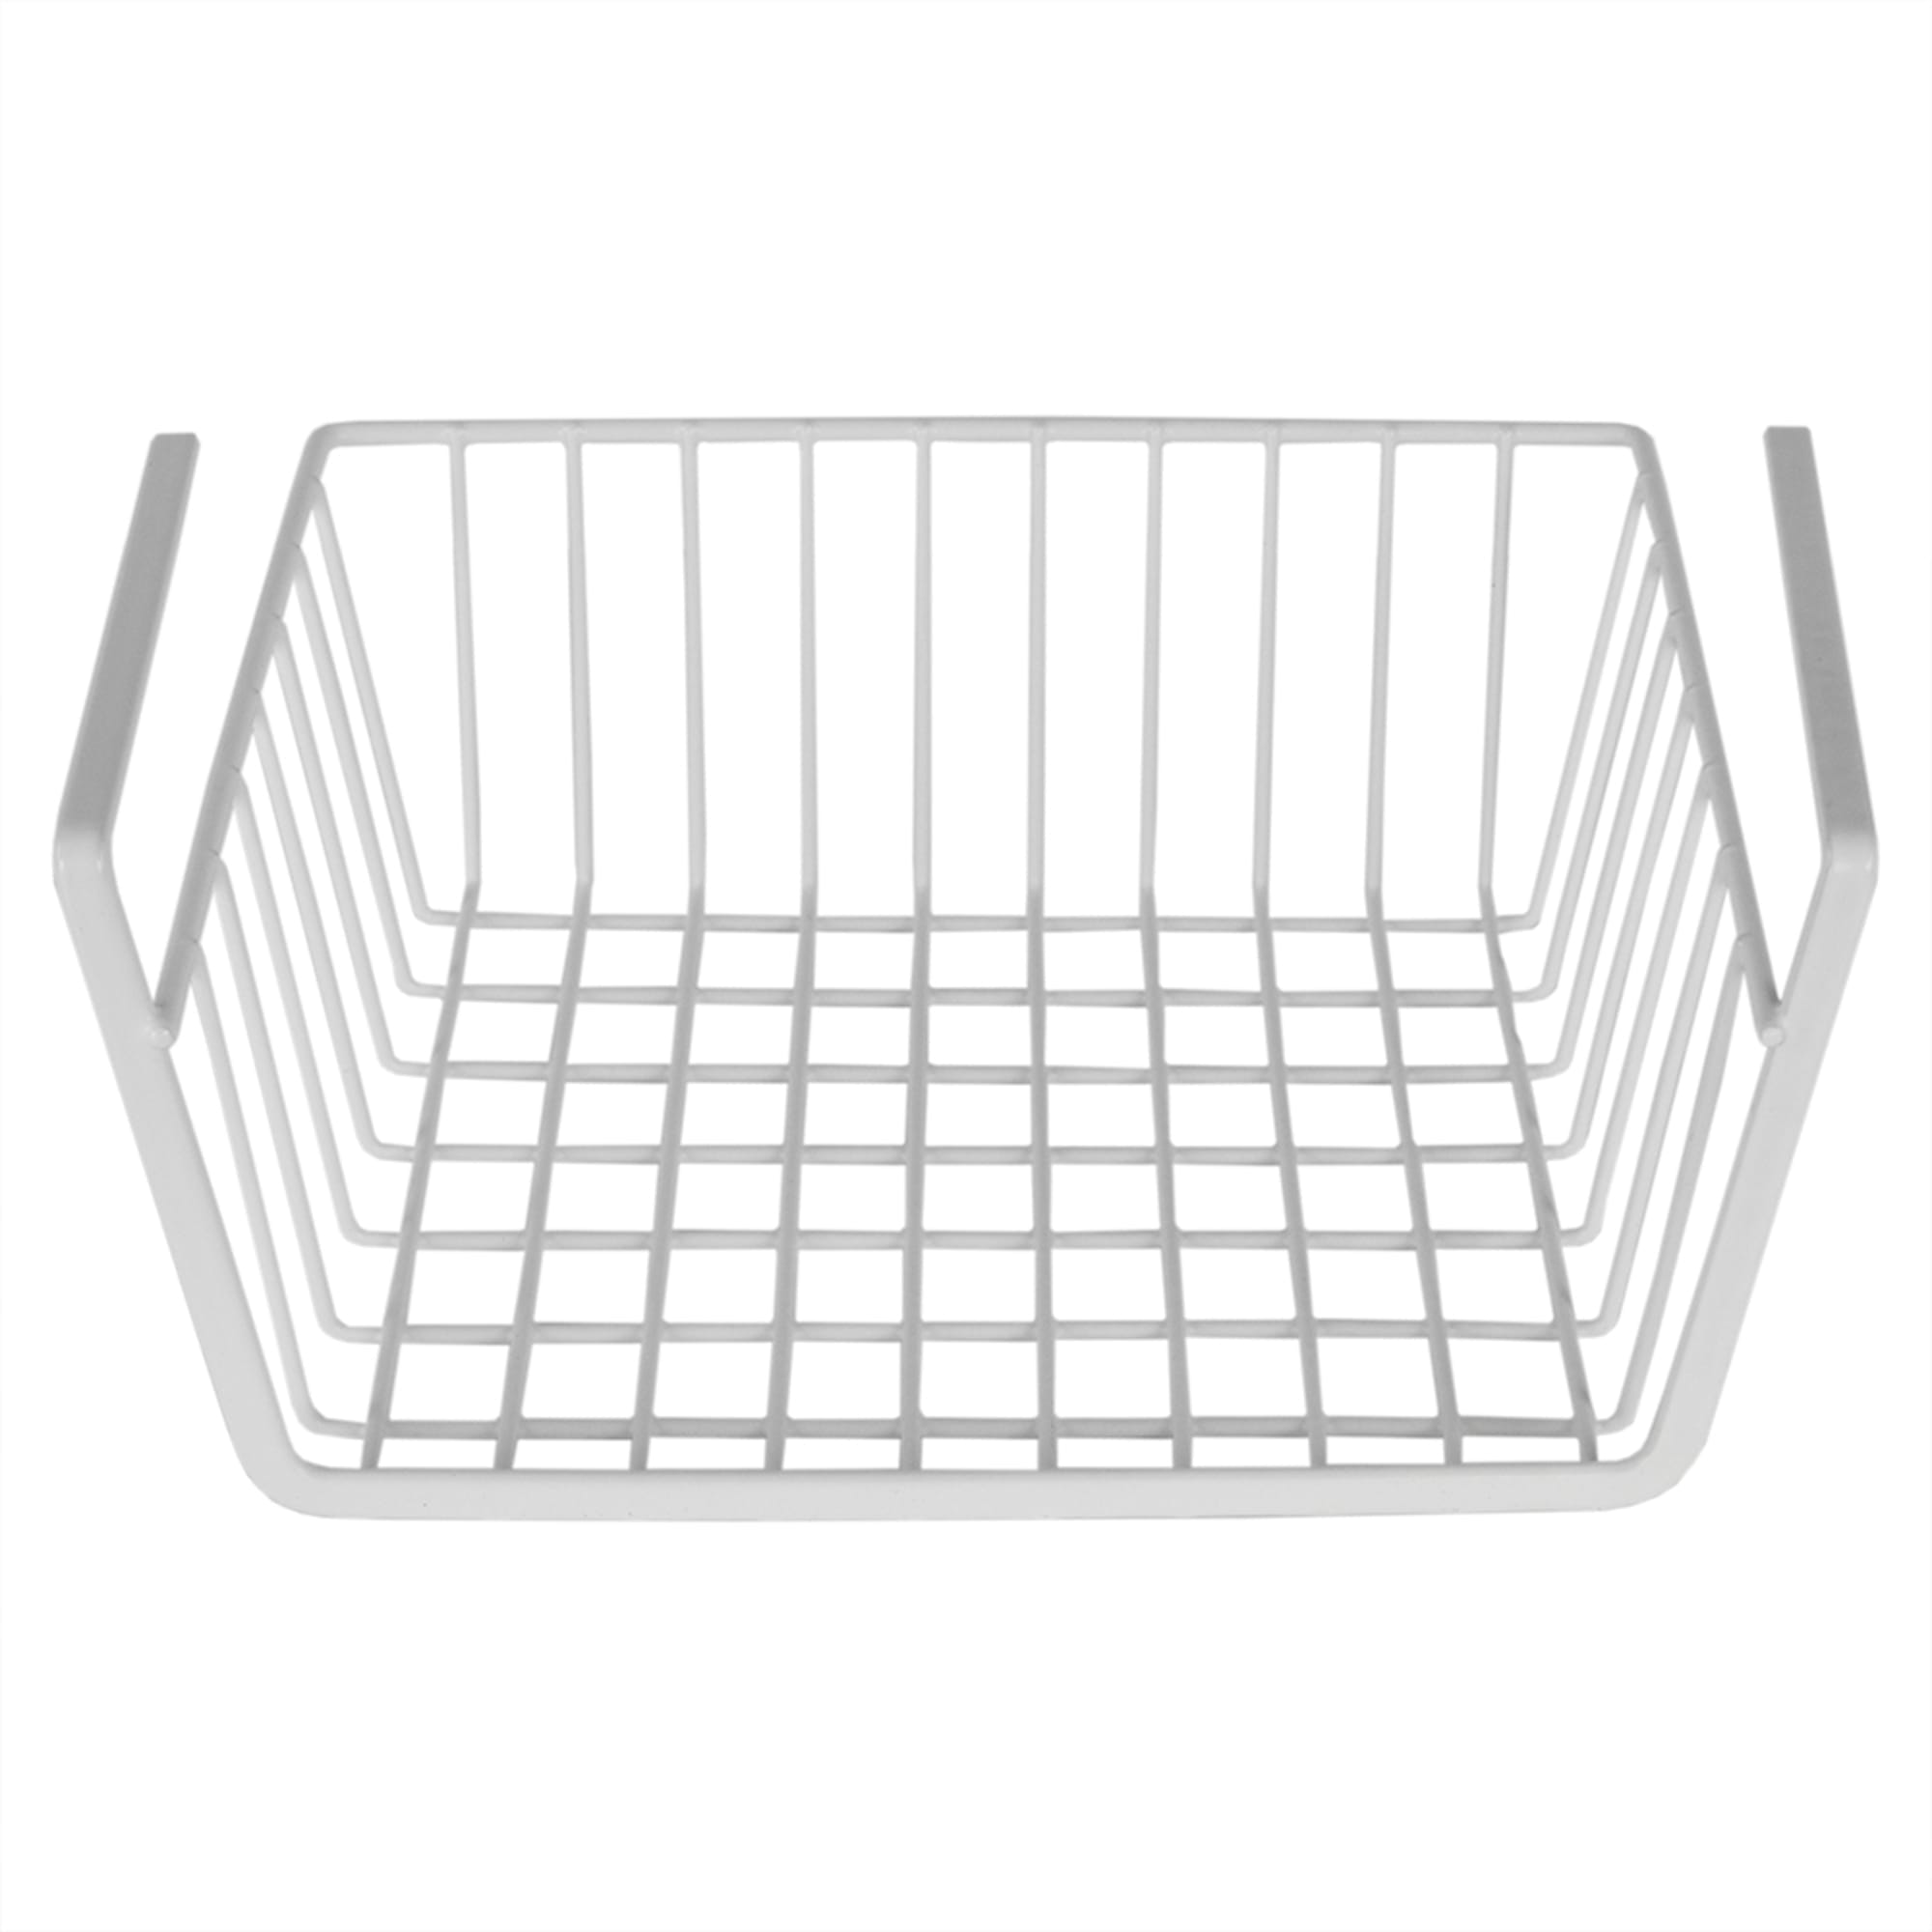 Home Basics Small Under-the-Shelf Basket $4.00 EACH, CASE PACK OF 6